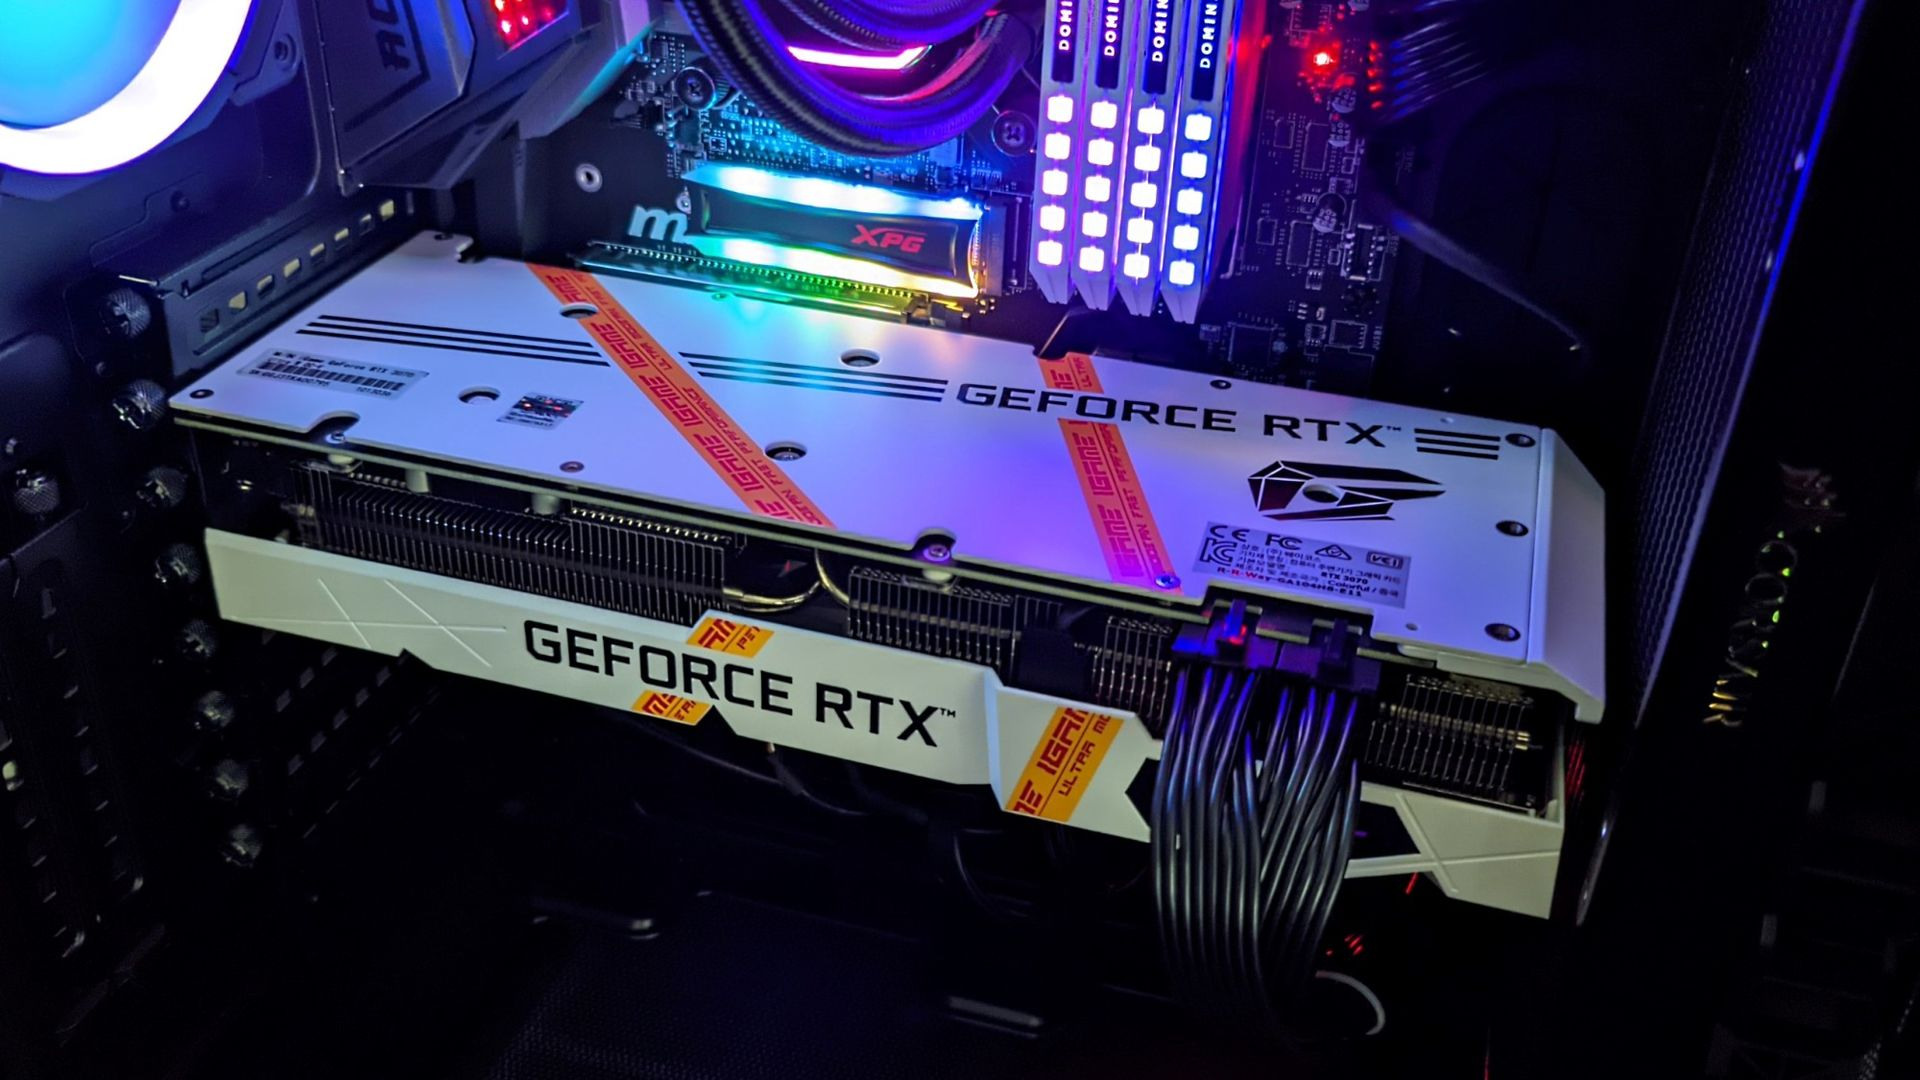 Colorful igame 3070. Colorful IGAME RTX 3070 ti Ultra w OC. Видеокарта colorful IGAME GEFORCE RTX 3060 Ultra. Colorful IGAME GEFORCE RTX 3070 Ultra w OC. Видеокарта RTX 3070 ti.